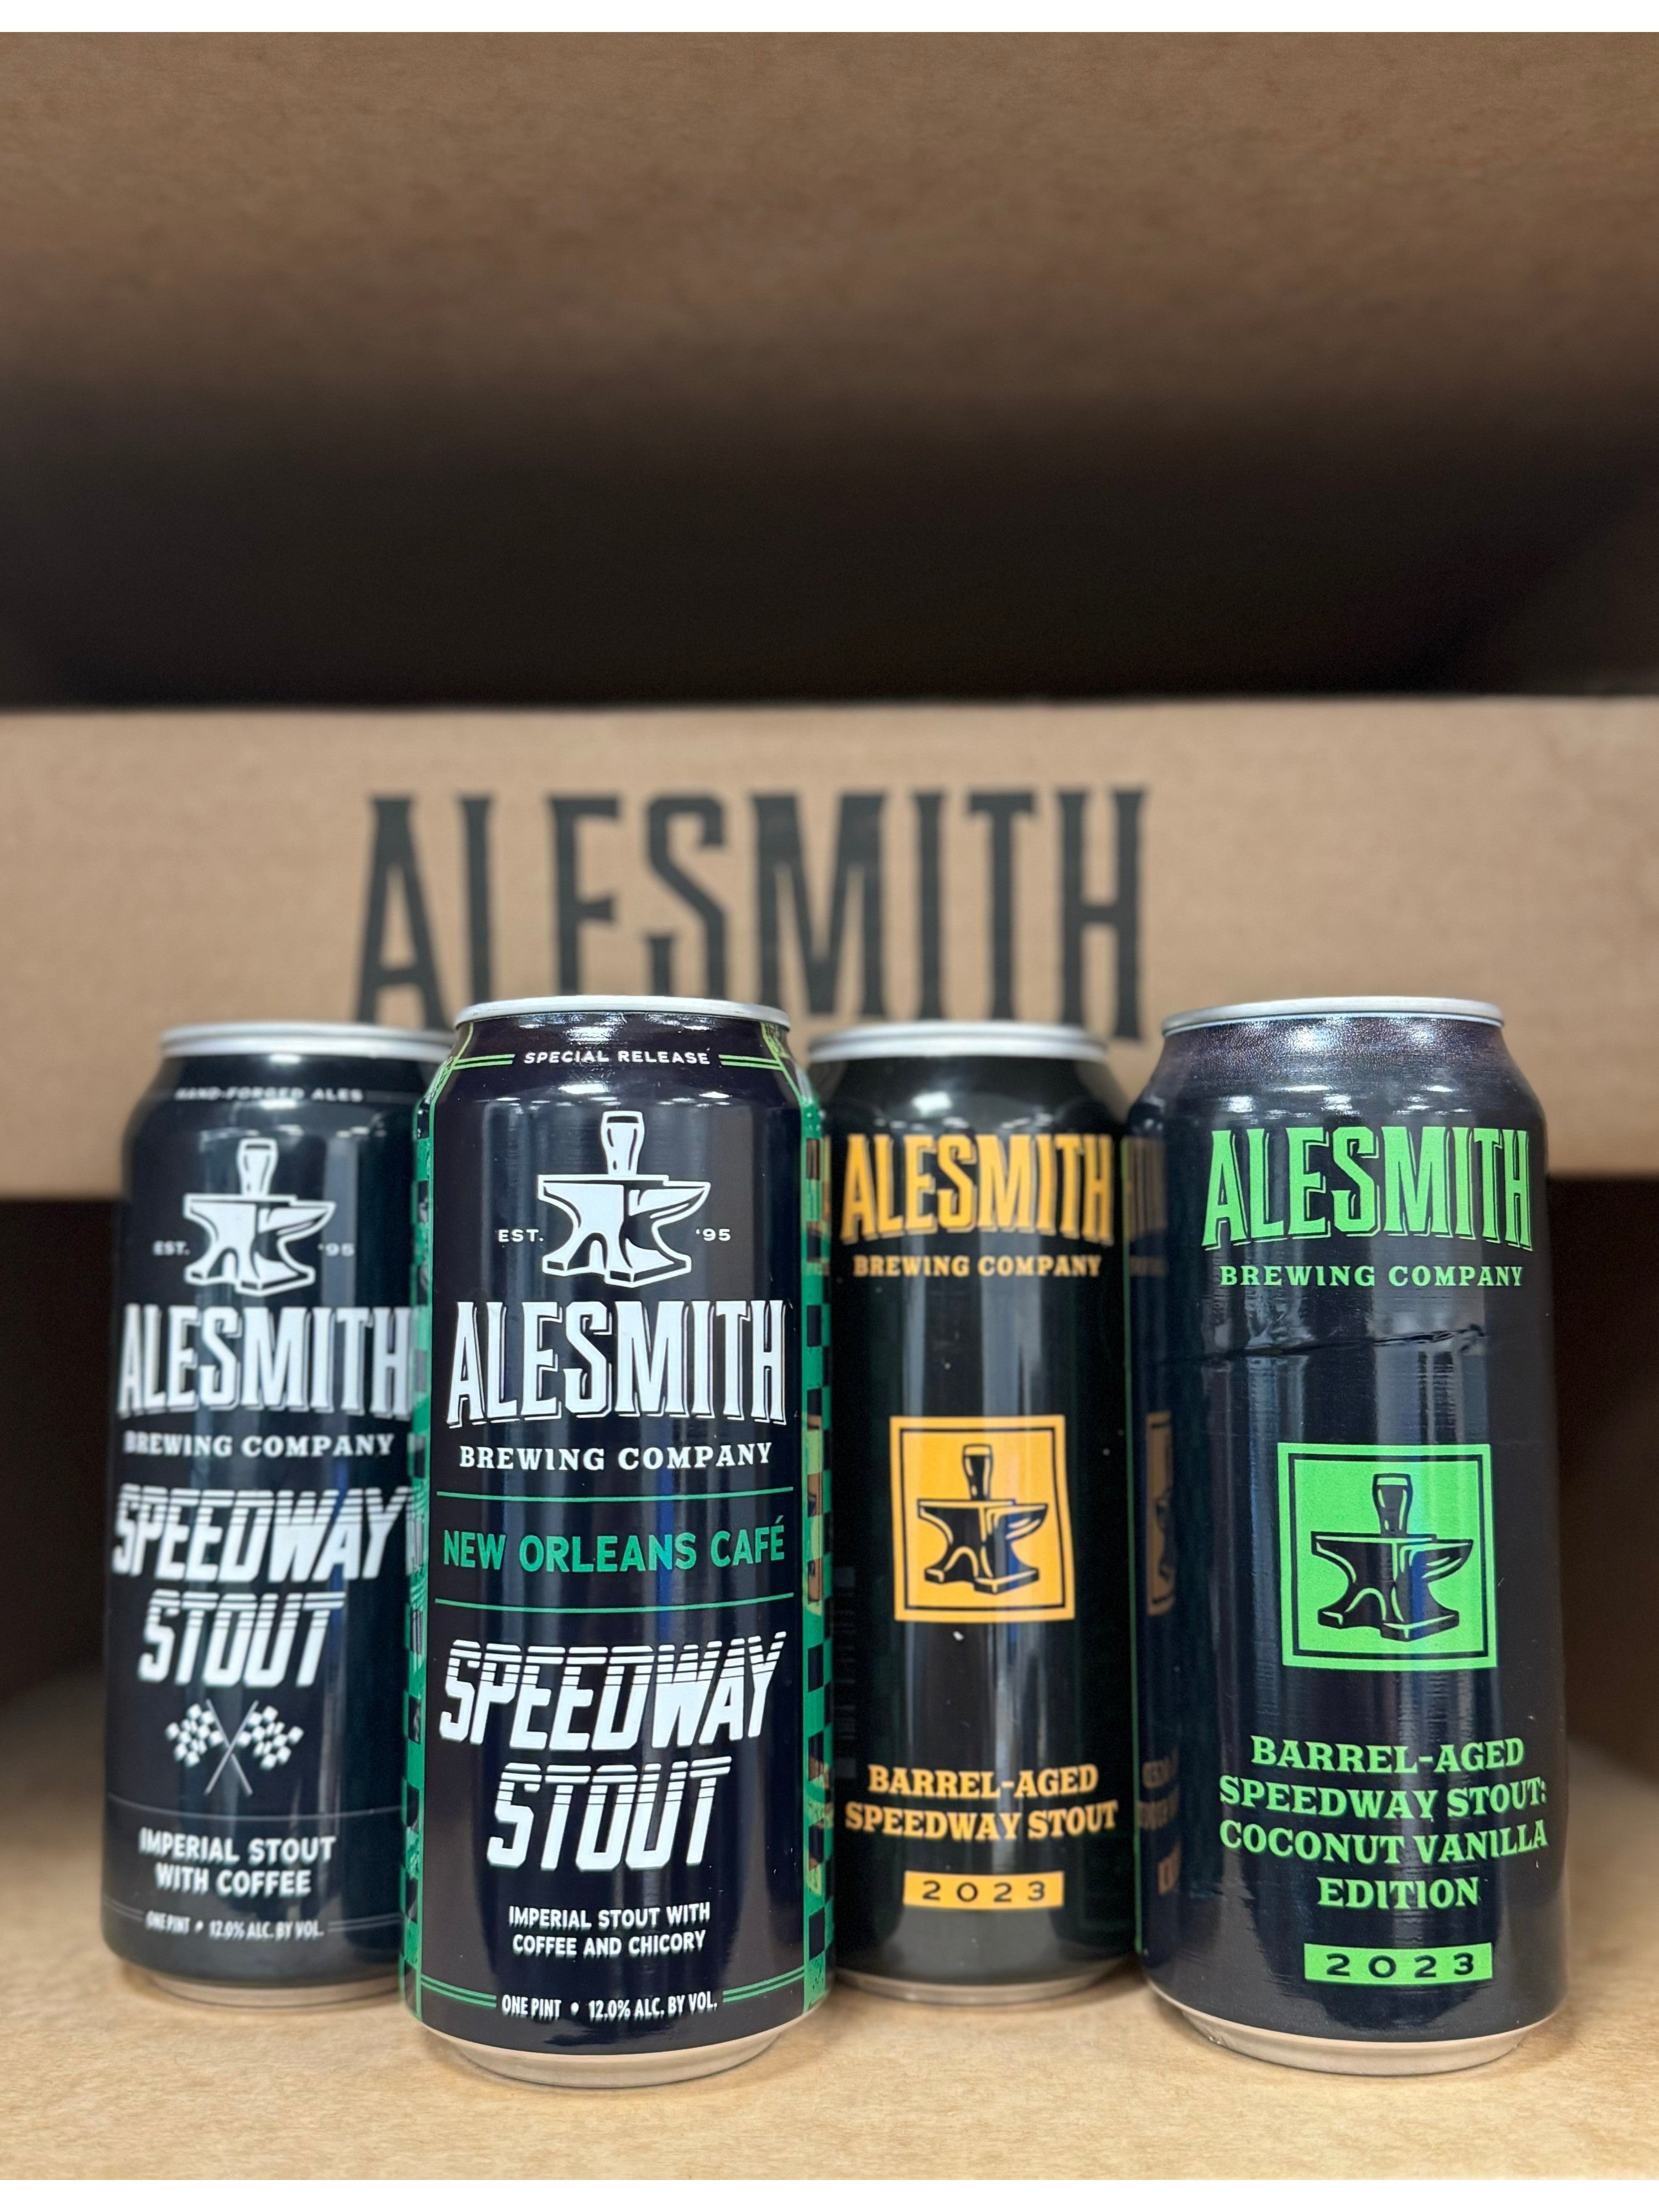 -AleSmith- Alesmith 🚀 Take Off Set 1-Packs & Cases- Only @ Beer Republic - The best online beer store for American & Canadian craft beer - Buy beer online from the USA and Canada - Bier online kopen - Amerikaans bier kopen - Craft beer store - Craft beer kopen - Amerikanisch bier kaufen - Bier online kaufen - Acheter biere online - IPA - Stout - Porter - New England IPA - Hazy IPA - Imperial Stout - Barrel Aged - Barrel Aged Imperial Stout - Brown - Dark beer - Blond - Blonde - Pilsner - Lager - Wheat - Wei